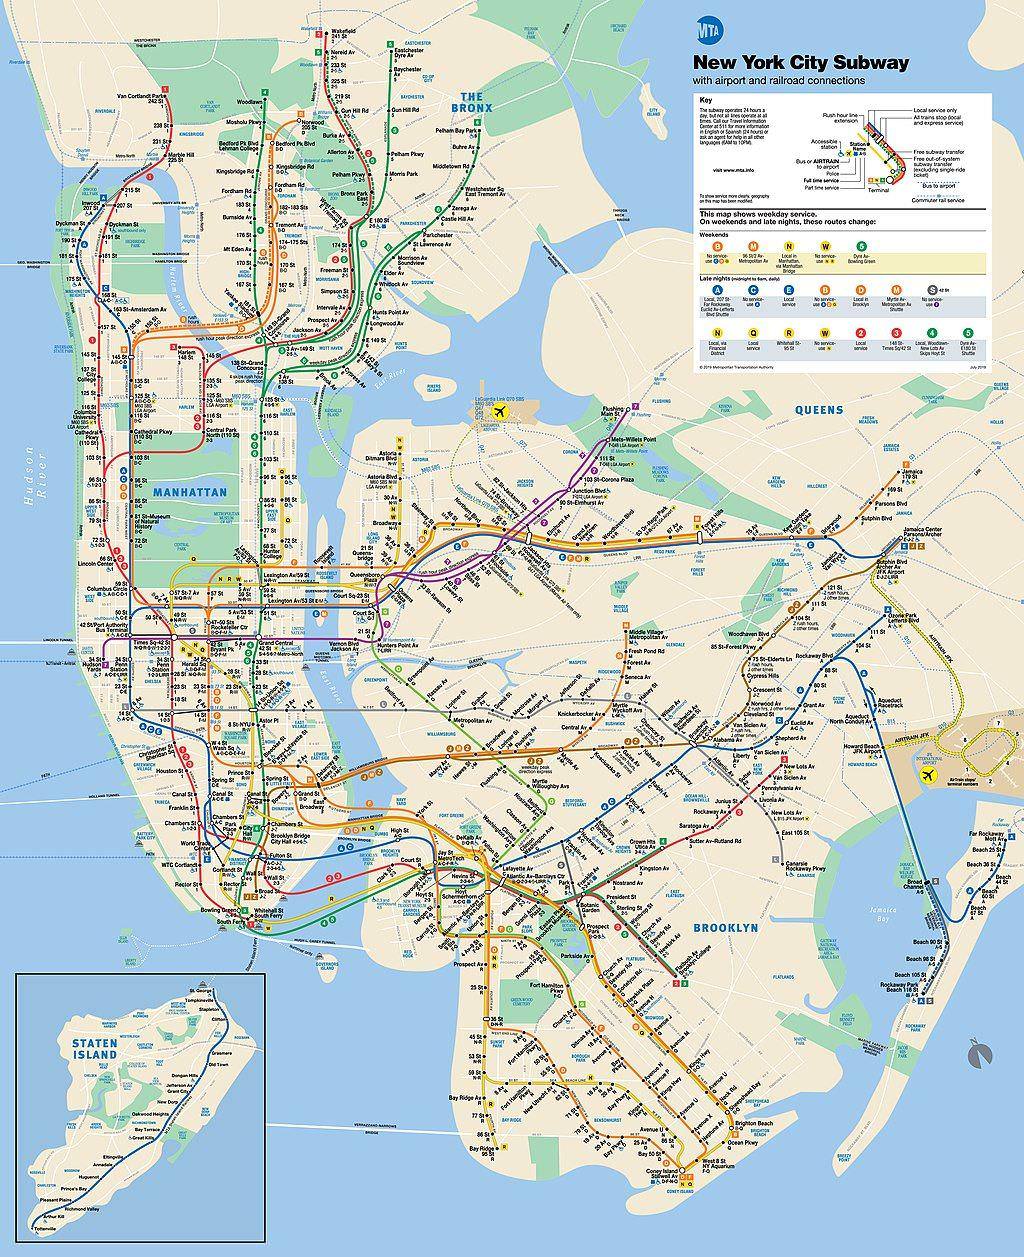 1024px-Official_New_York_City_Subway_Map_vc.jpg